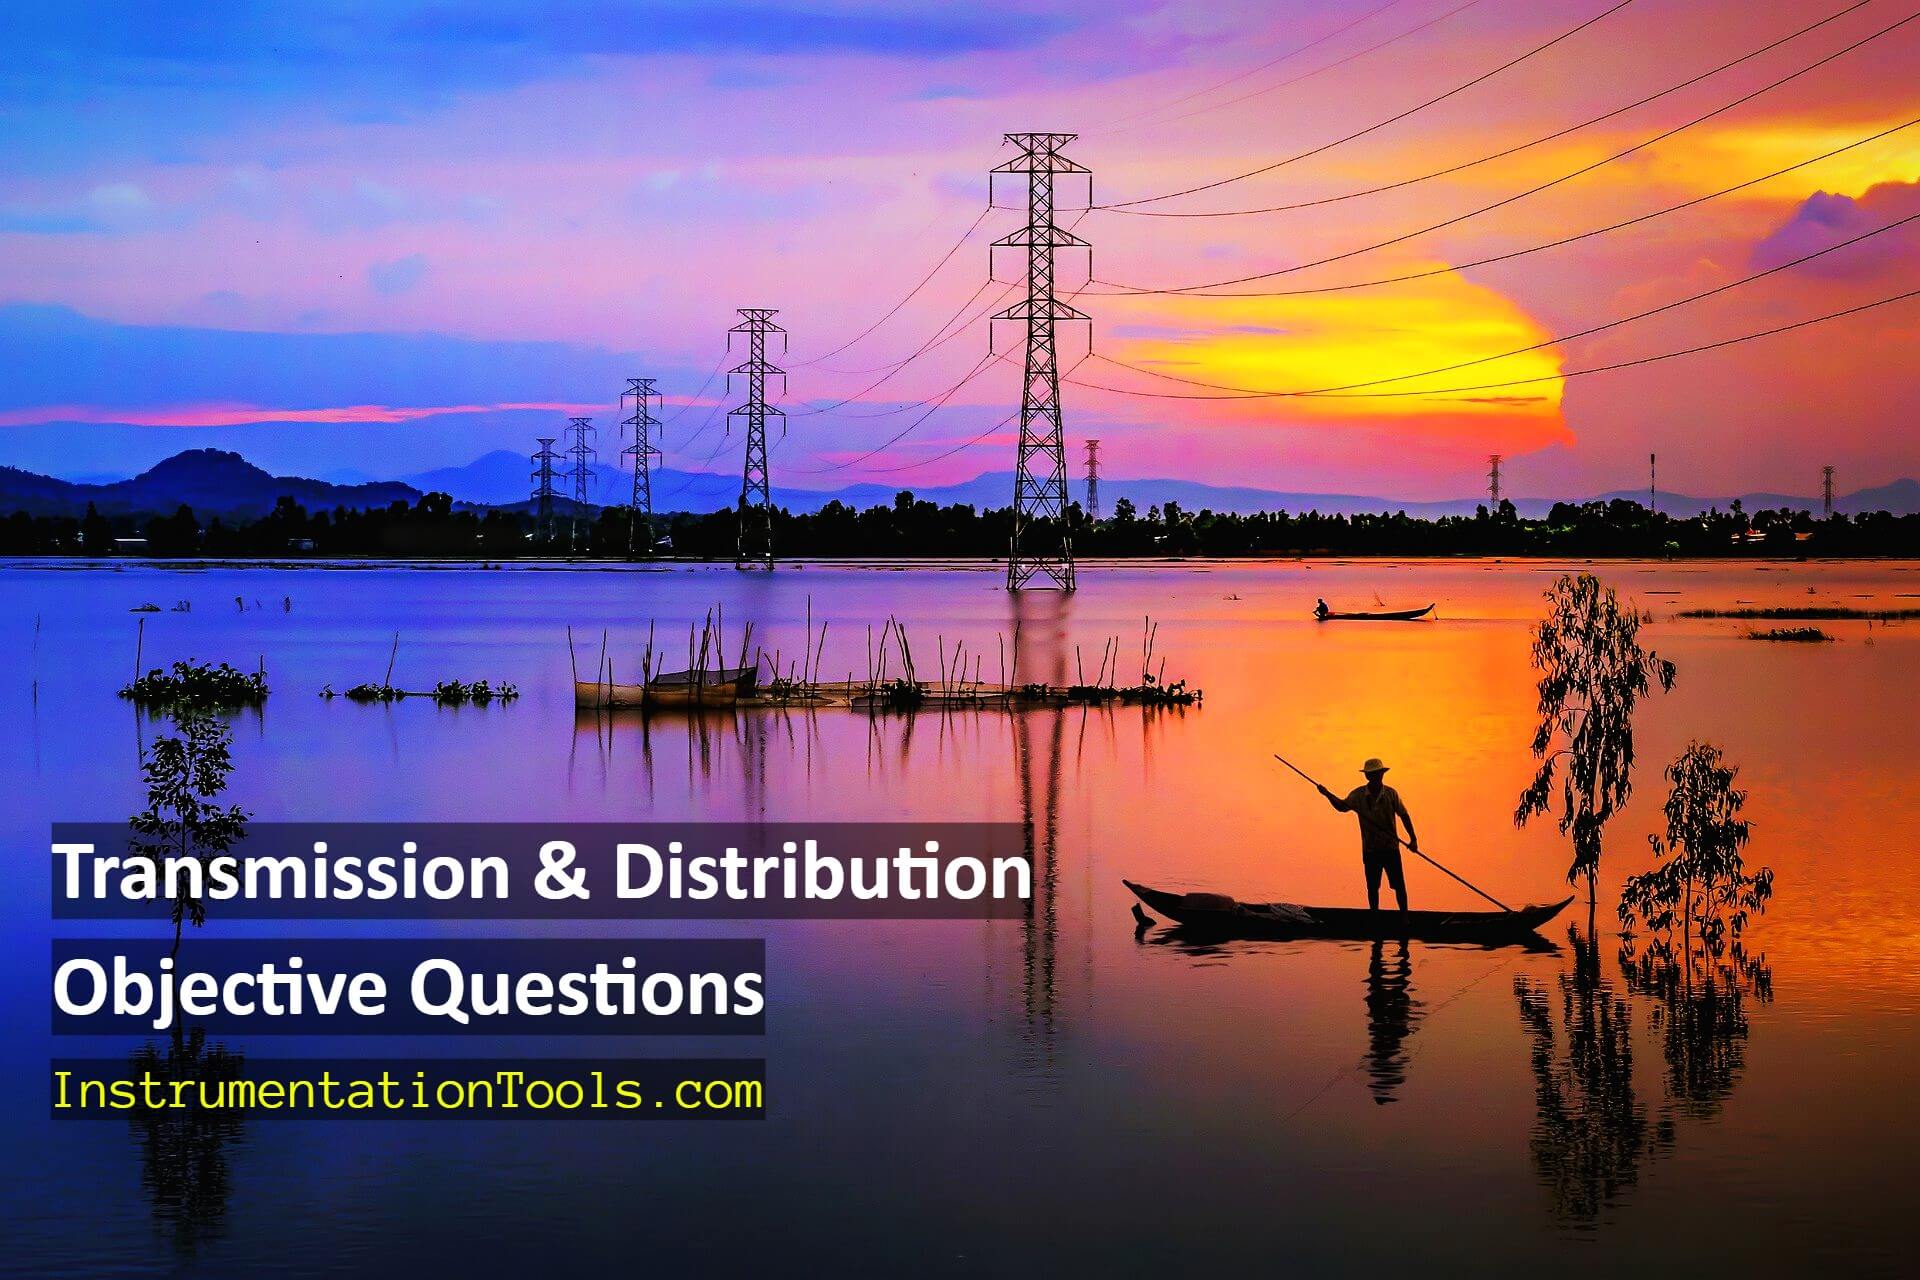 Transmission and Distribution Objective Questions and Answers